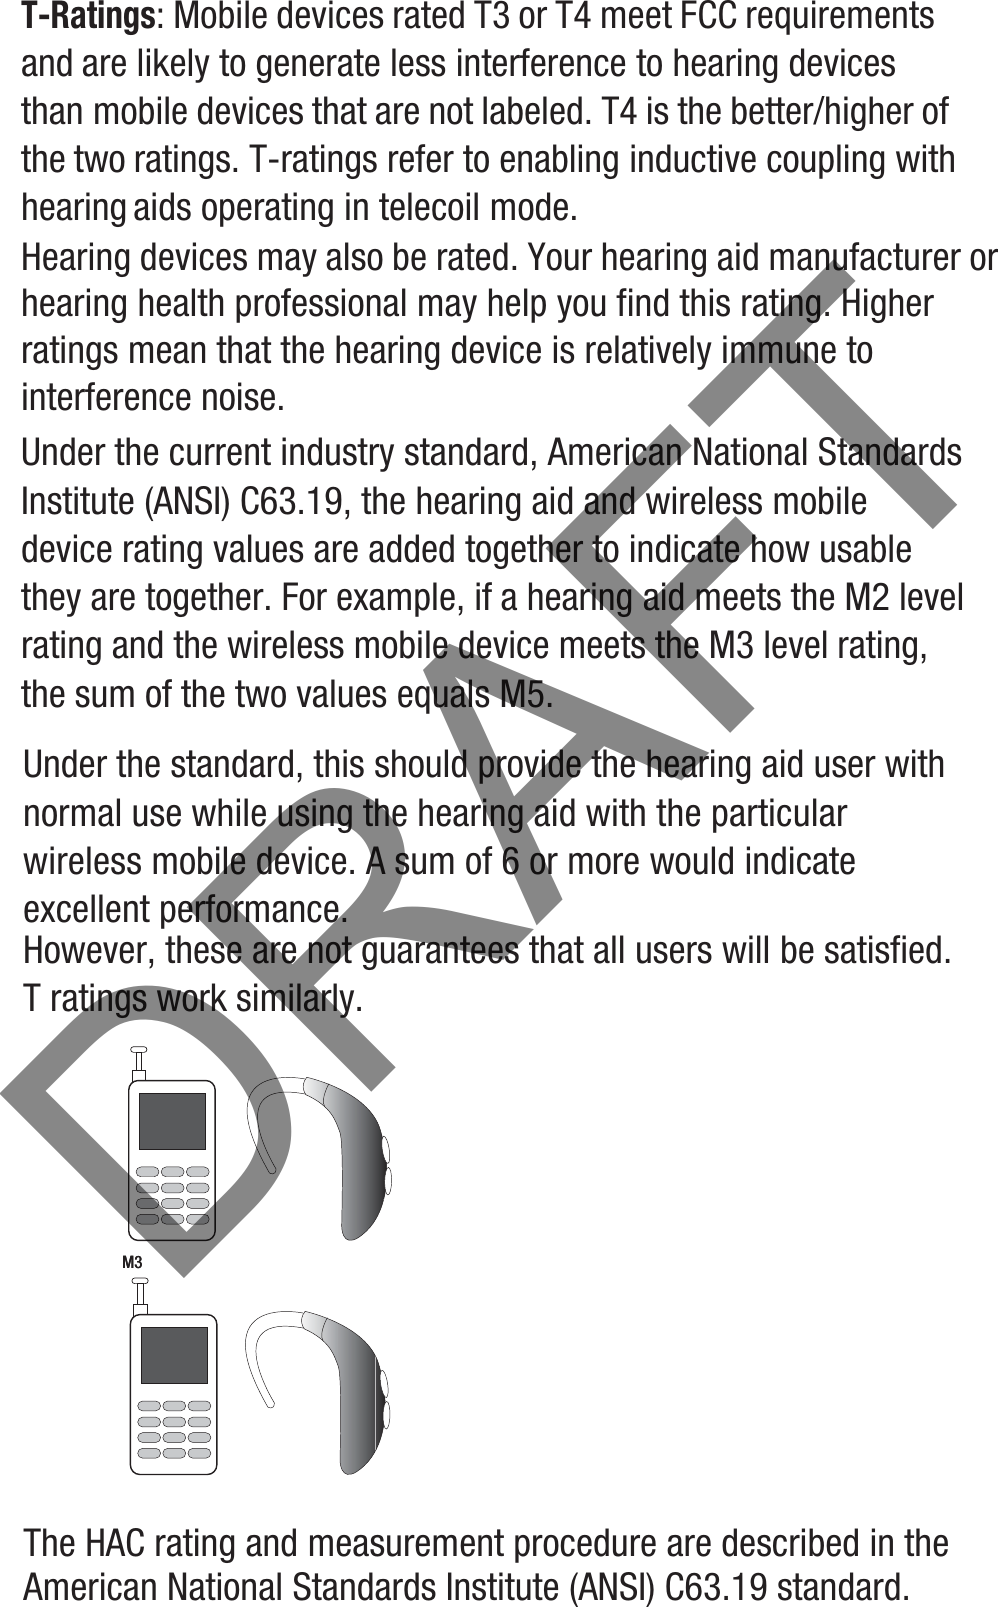 T-Ratings: Mobile devices rated T3 or T4 meet FCC requirements and are likely to generate less interference to hearing devices than mobile devices that are not labeled. T4 is the better/higher of the two ratings. T-ratings refer to enabling inductive coupling with hearing aids operating in telecoil mode.Hearing devices may also be rated. Your hearing aid manufacturer or hearing health professional may help you find this rating. Higher ratings mean that the hearing device is relatively immune to interference noise. Under the current industry standard, American National Standards Institute (ANSI) C63.19, the hearing aid and wireless mobile device rating values are added together to indicate how usable they are together. For example, if a hearing aid meets the M2 level rating and the wireless mobile device meets the M3 level rating, the sum of the two values equals M5. Under the standard, this should provide the hearing aid user with normal use while using the hearing aid with the particular wireless mobile device. A sum of 6 or more would indicate excellent performance.  However, these are not guarantees that all users will be satisfied. T ratings work similarly.The HAC rating and measurement procedure are described in the American National Standards Institute (ANSI) C63.19 standard.M3       M3DRAFT